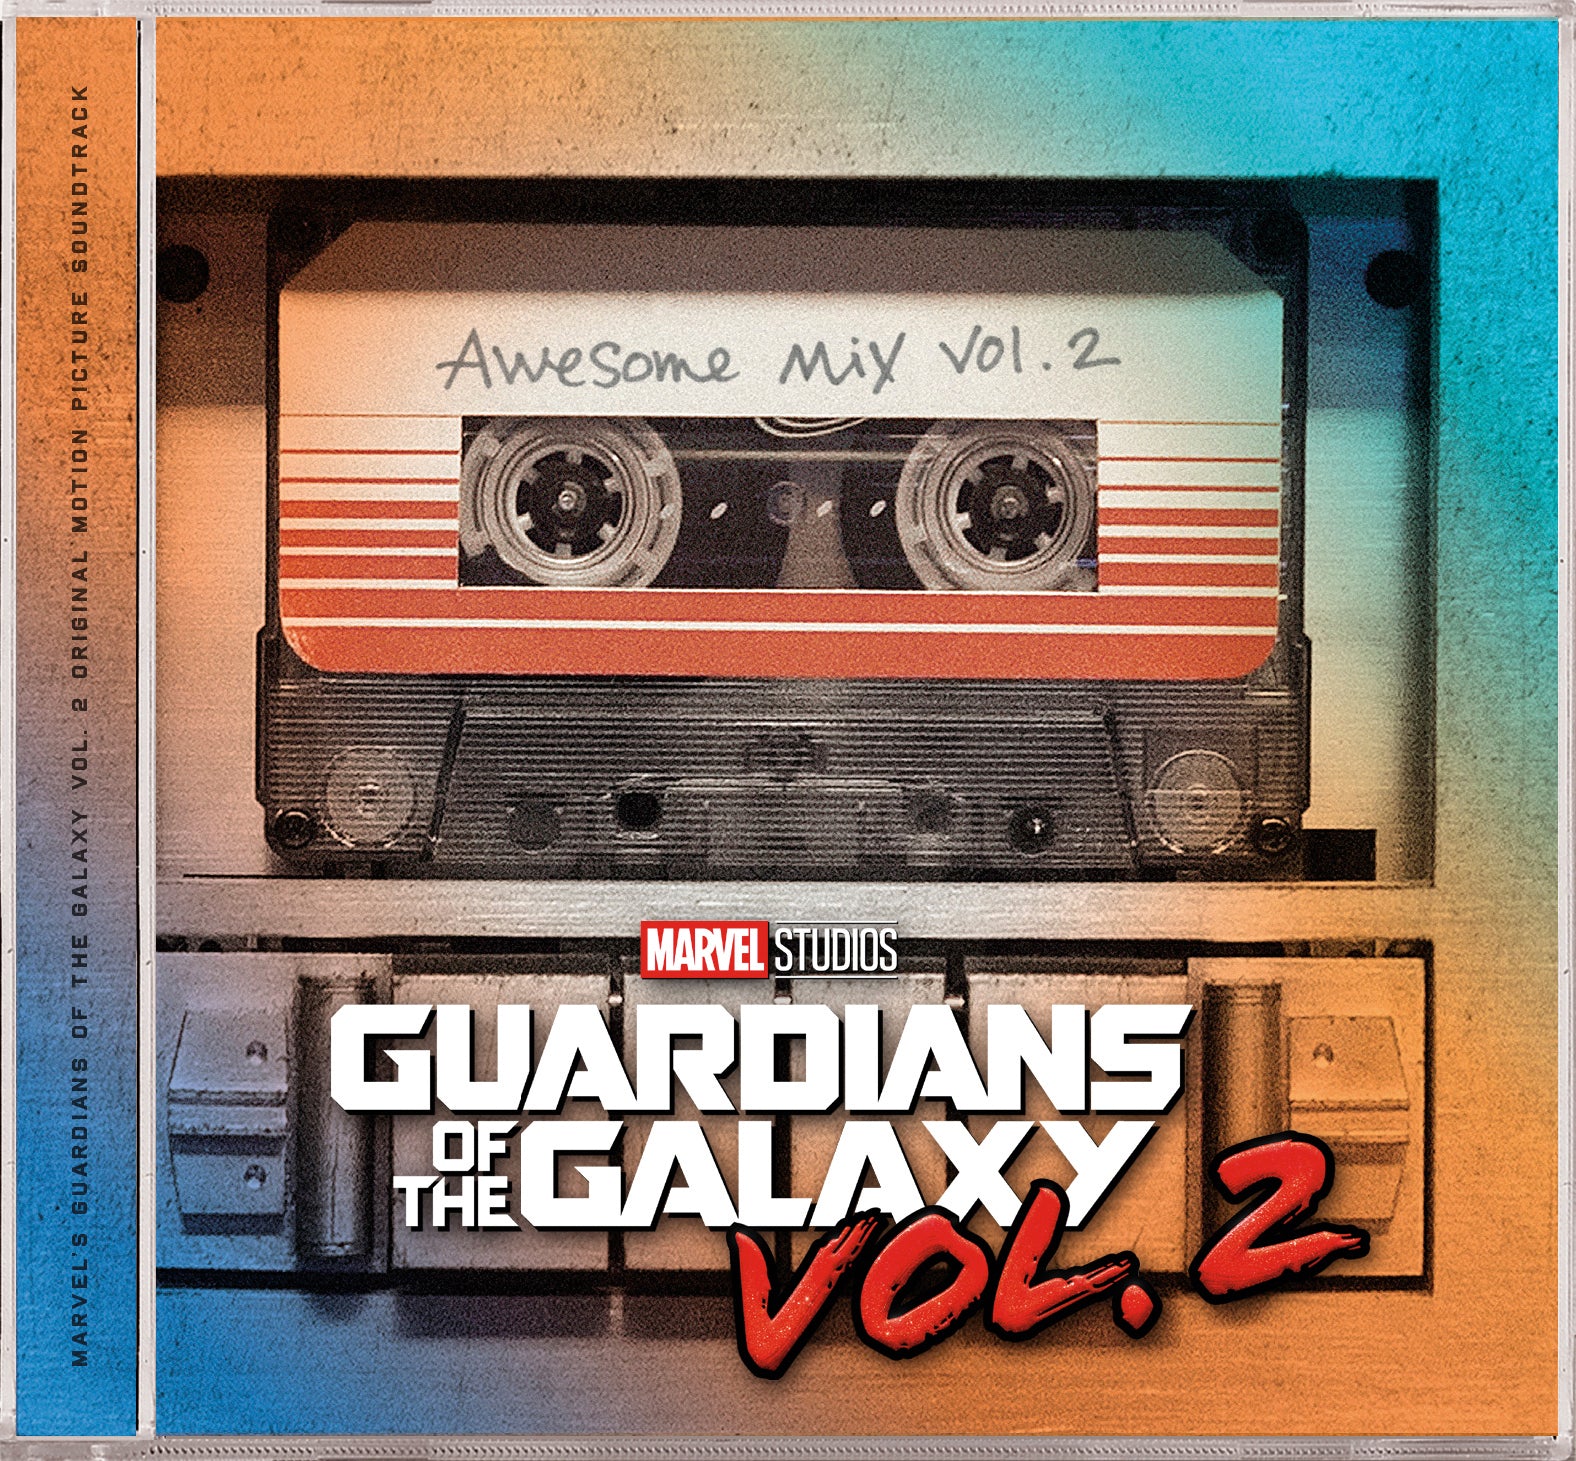 Various Artists - Guardians of the Galaxy Vol. 2: Awesome Mix Vol. 2: CD